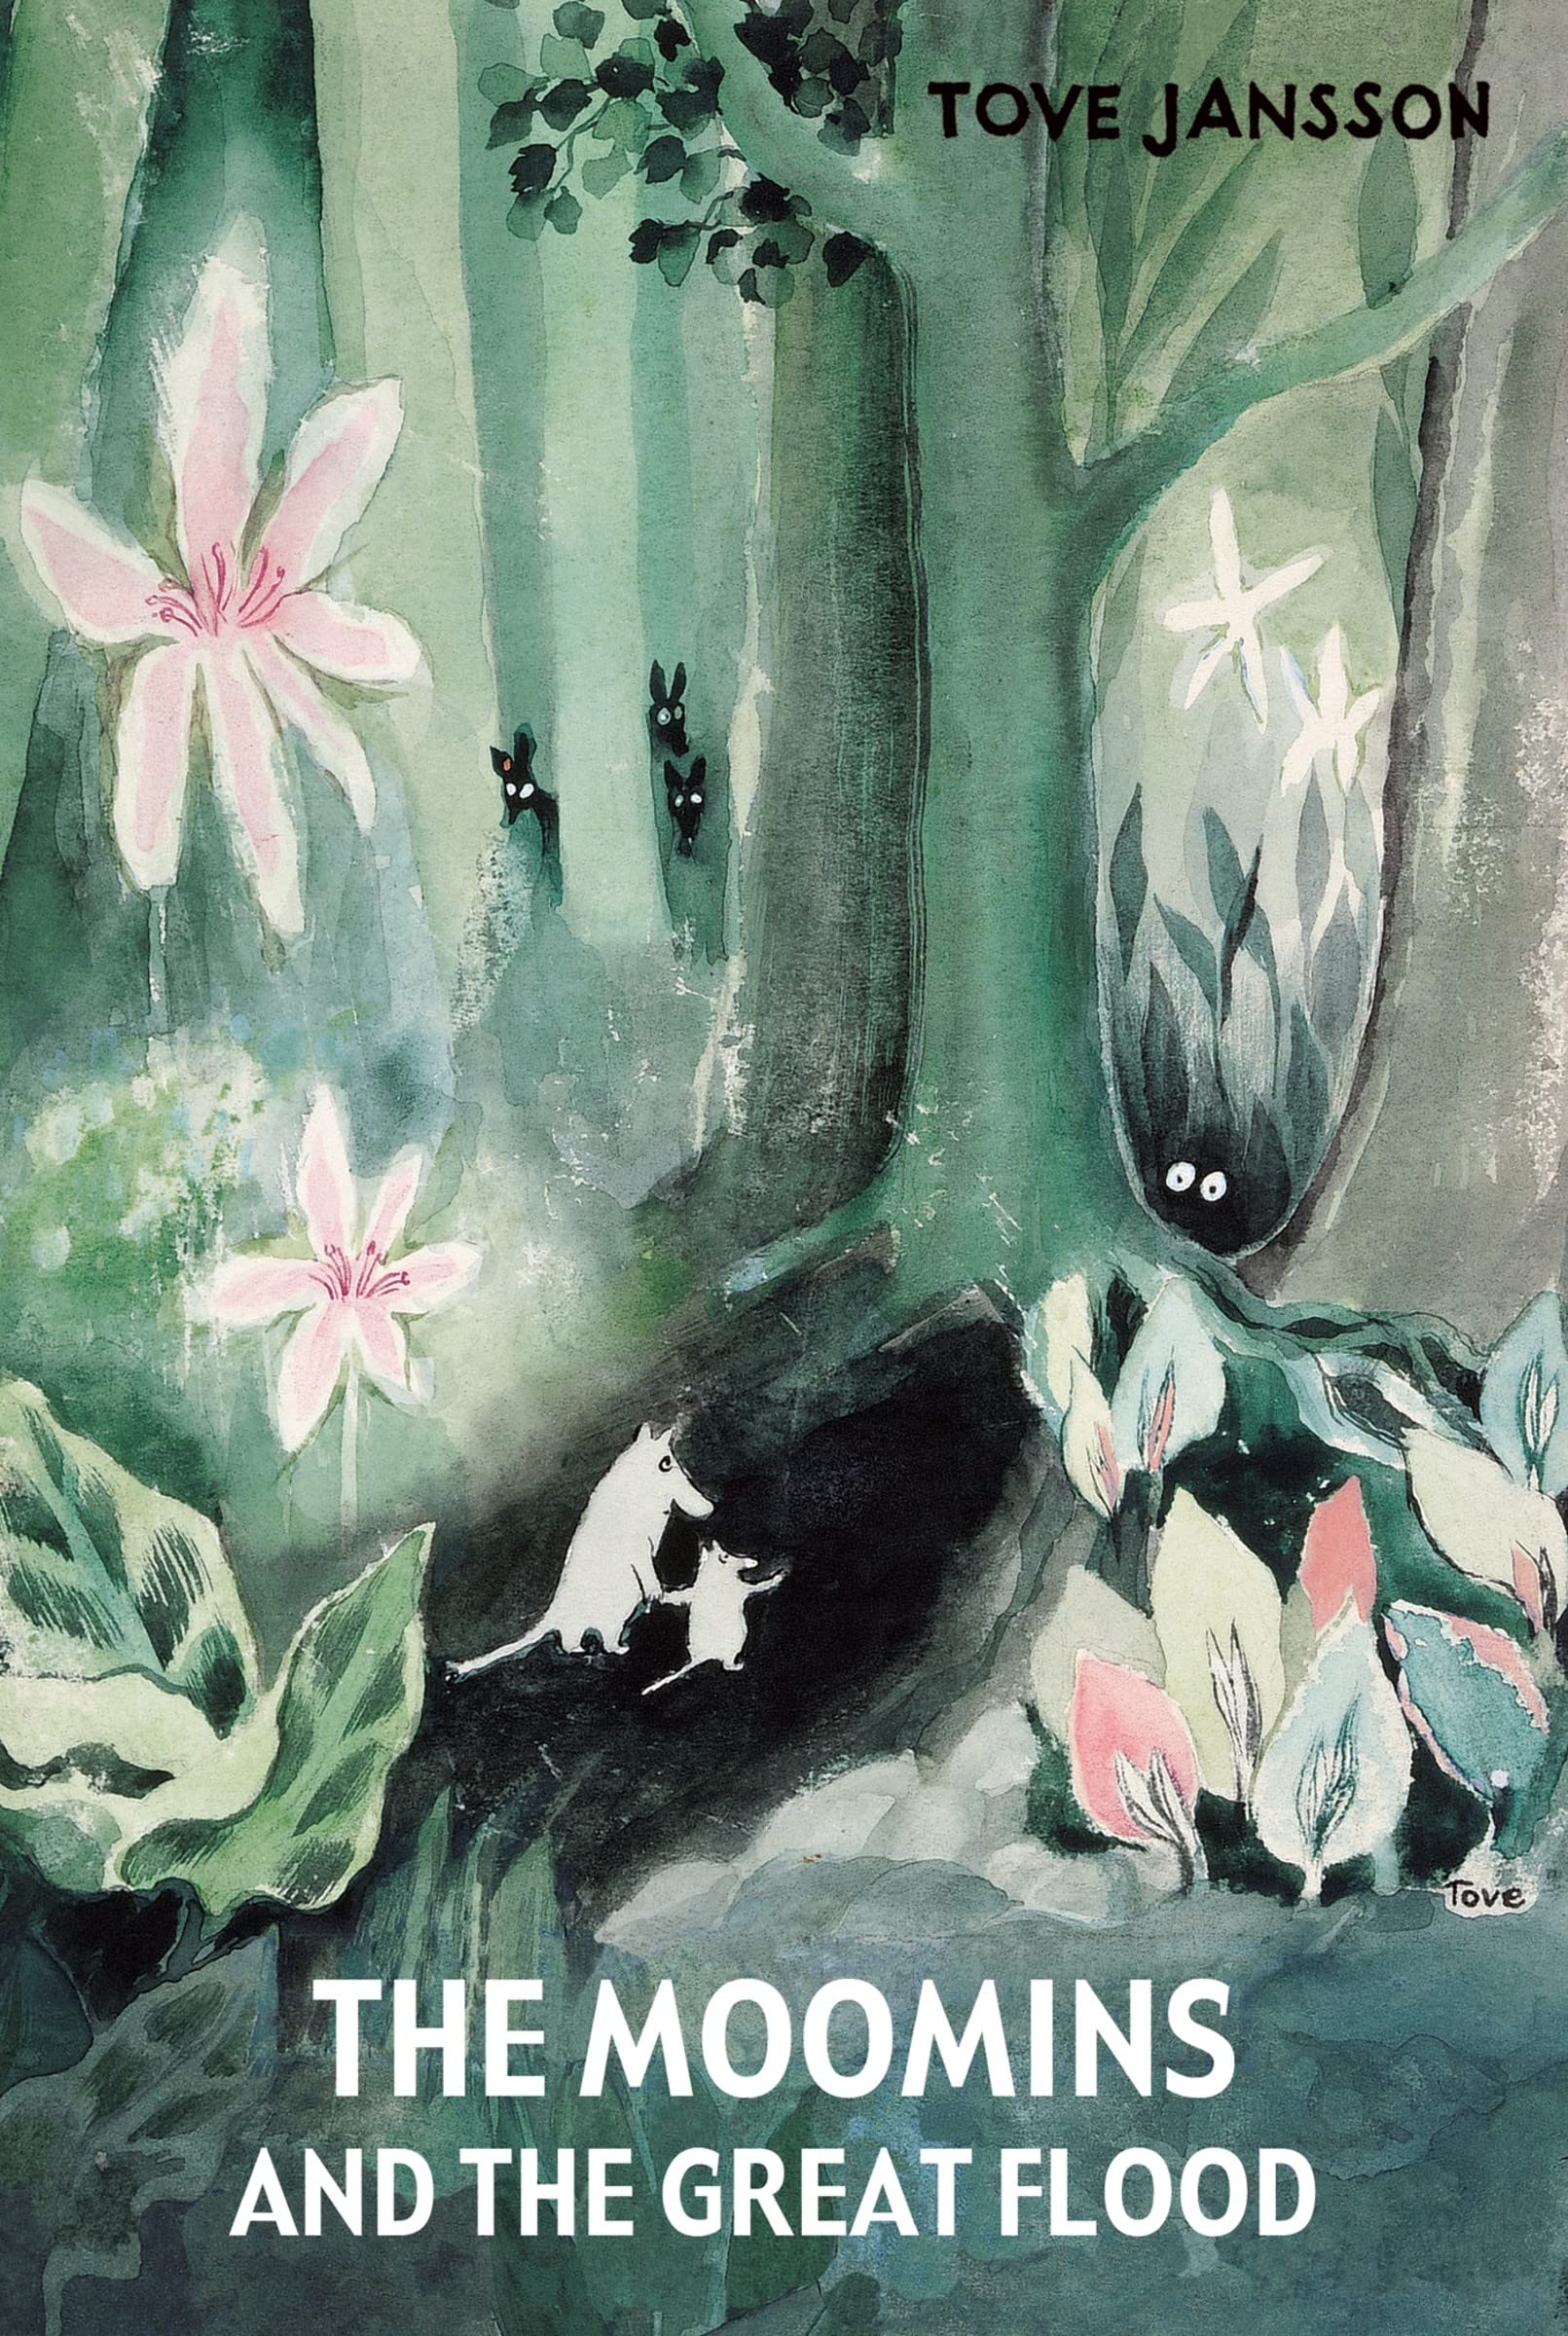 Trove Jansson's The Moomins and the Great Flood book cover